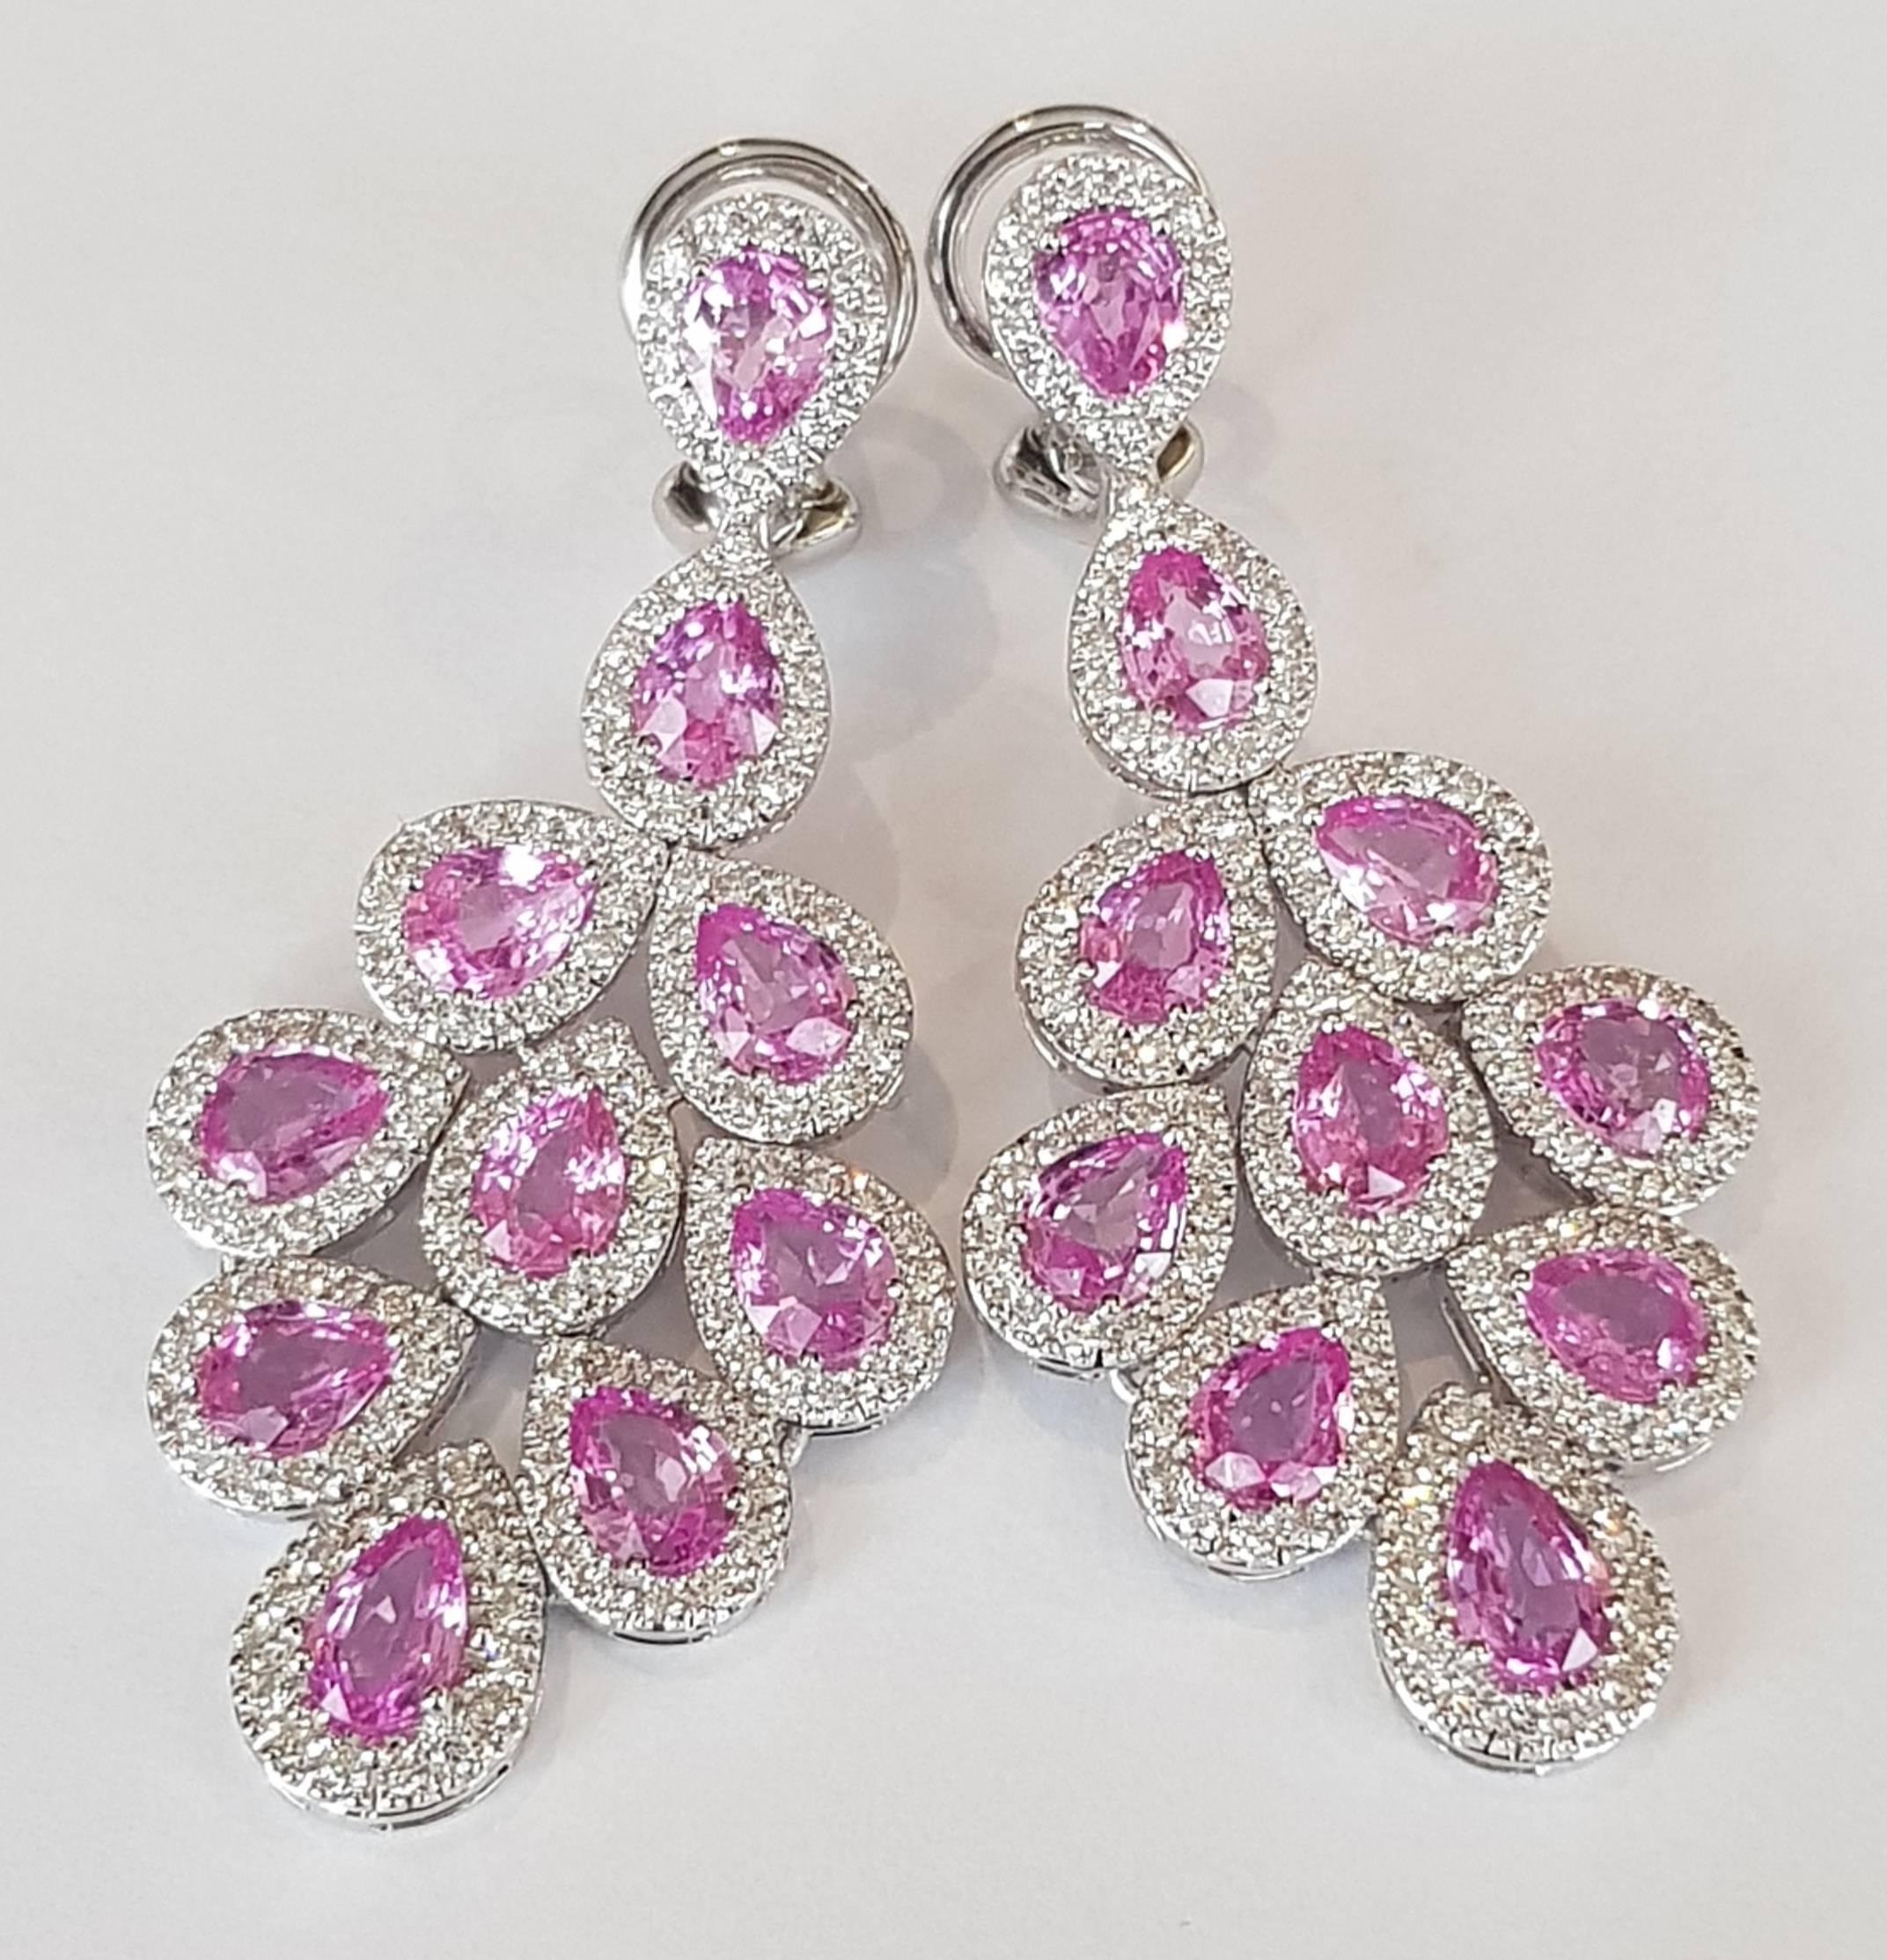 These 20 pink sapphires 7.56ct and 284 diamonds 2.31ct earrings are beautiful, elegant and versatile. Unique pair of handcrafted composition with 18K white gold, that will compliment your outfit perfectly.

Comes with clips and studs (either can be